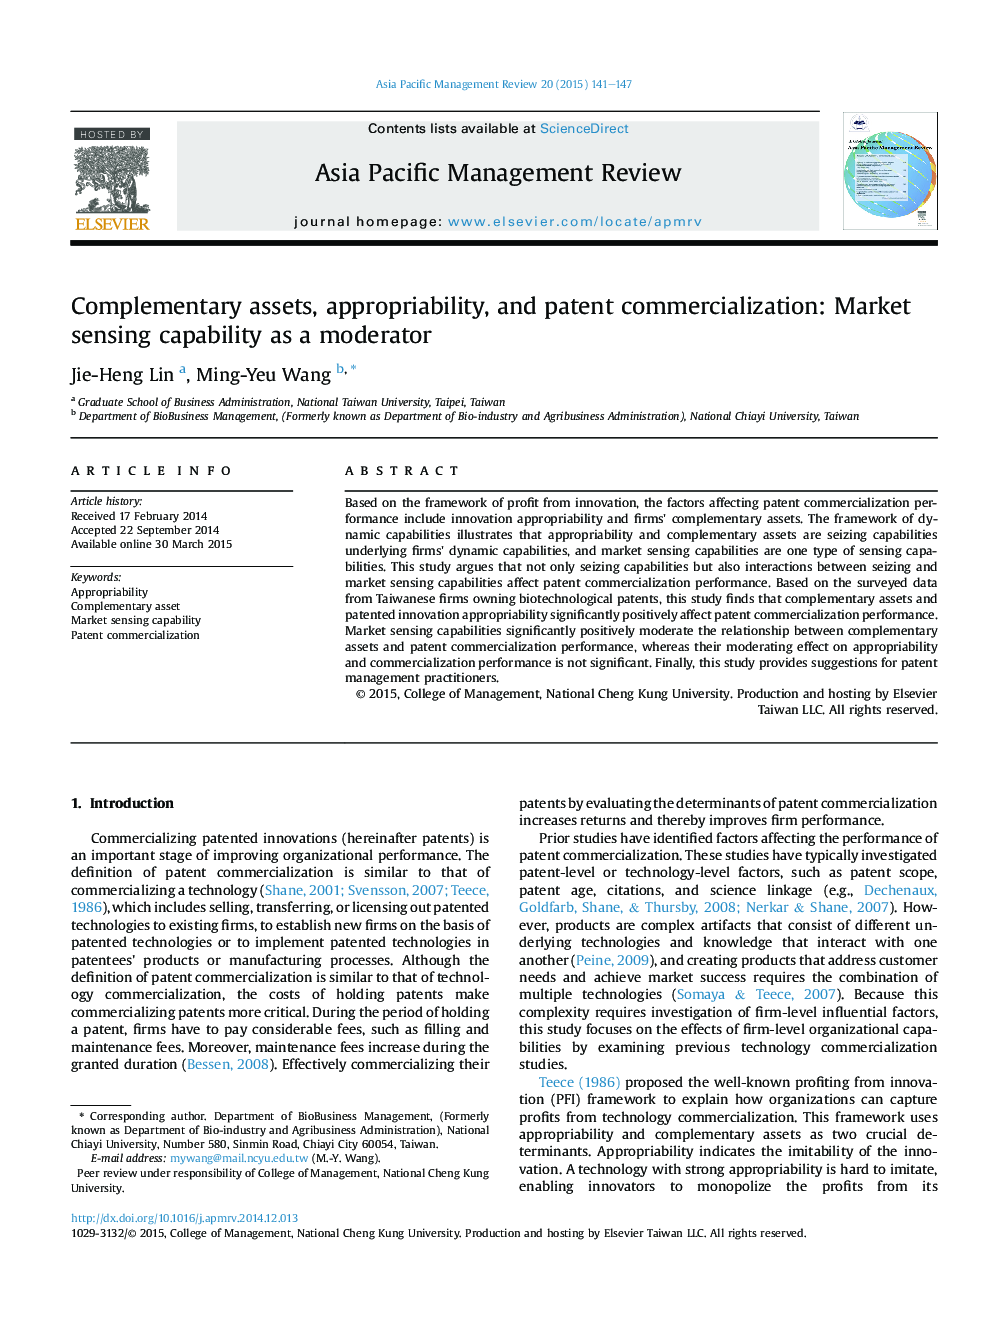 Complementary assets, appropriability, and patent commercialization: Market sensing capability as a moderator 